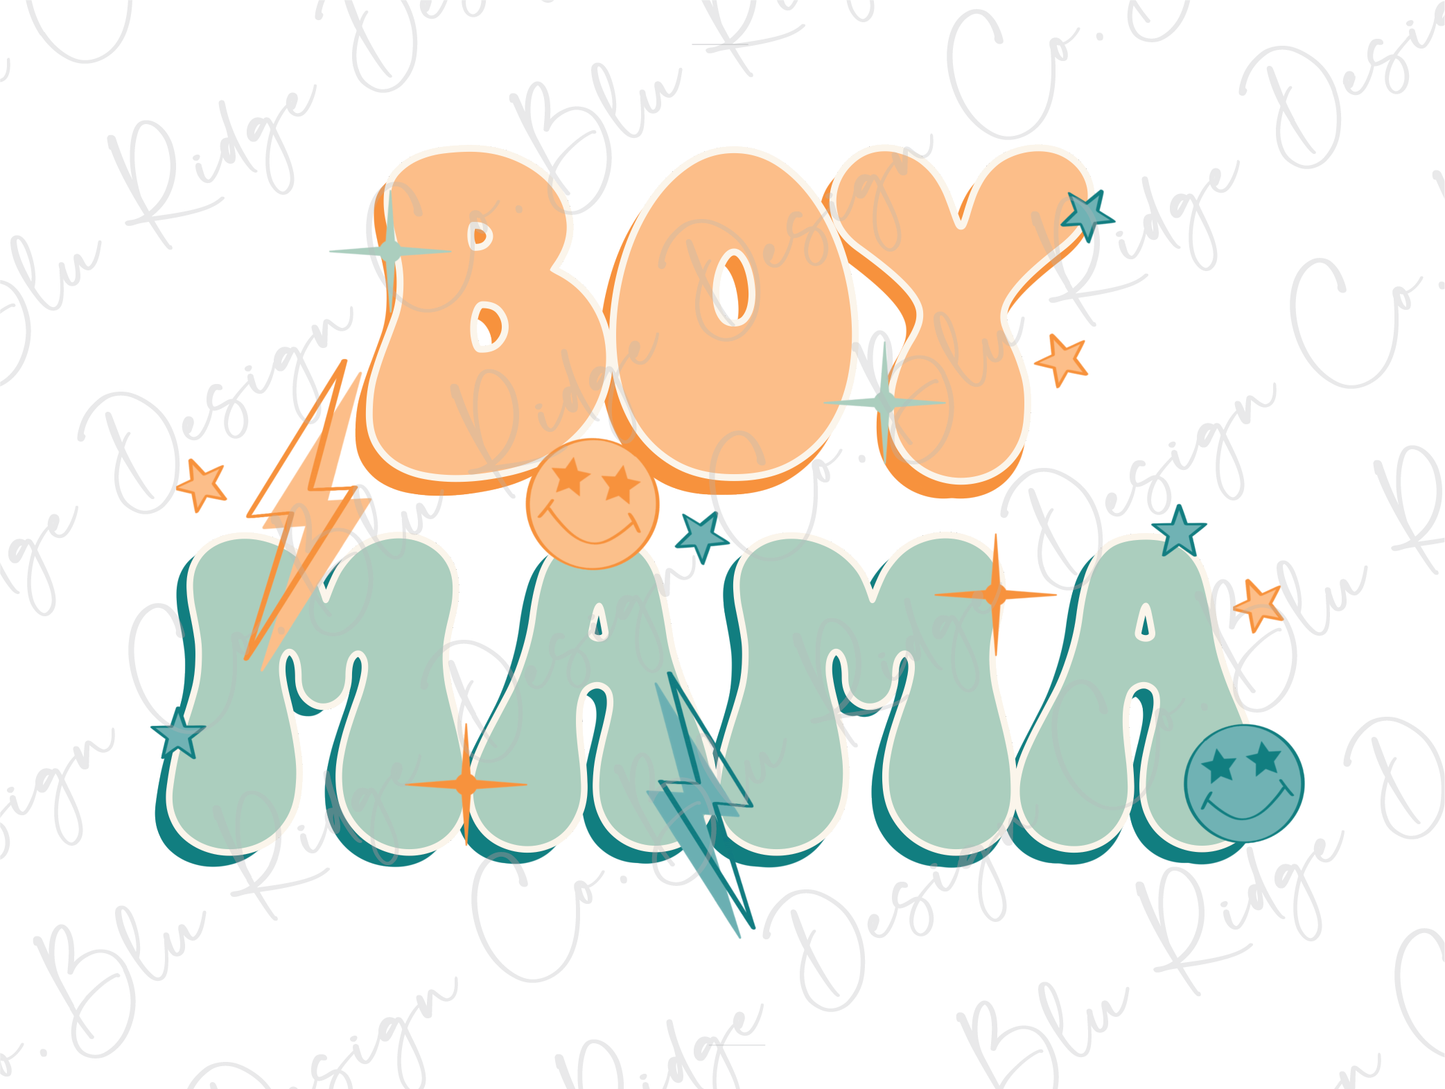 Boy Mama Retro Colorful Lightning Bolt, Stars, Smileys Stacked Direct To Film (DTF) Transfer